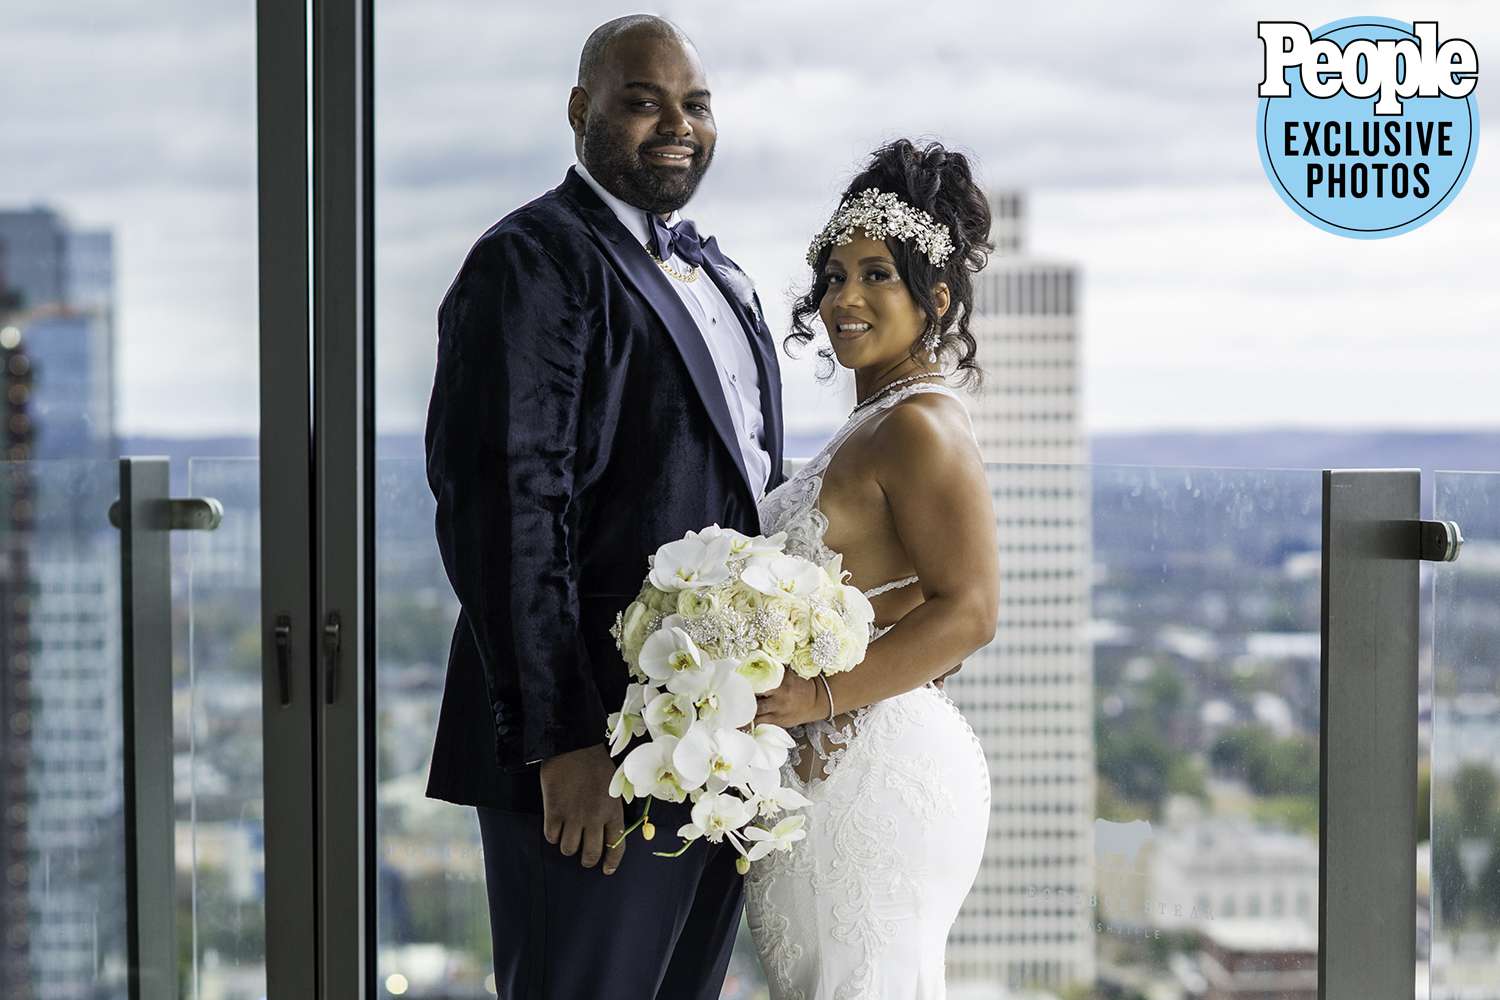 Michael Oher, Football Player Who Inspired 'The Blind Side,' Is Married